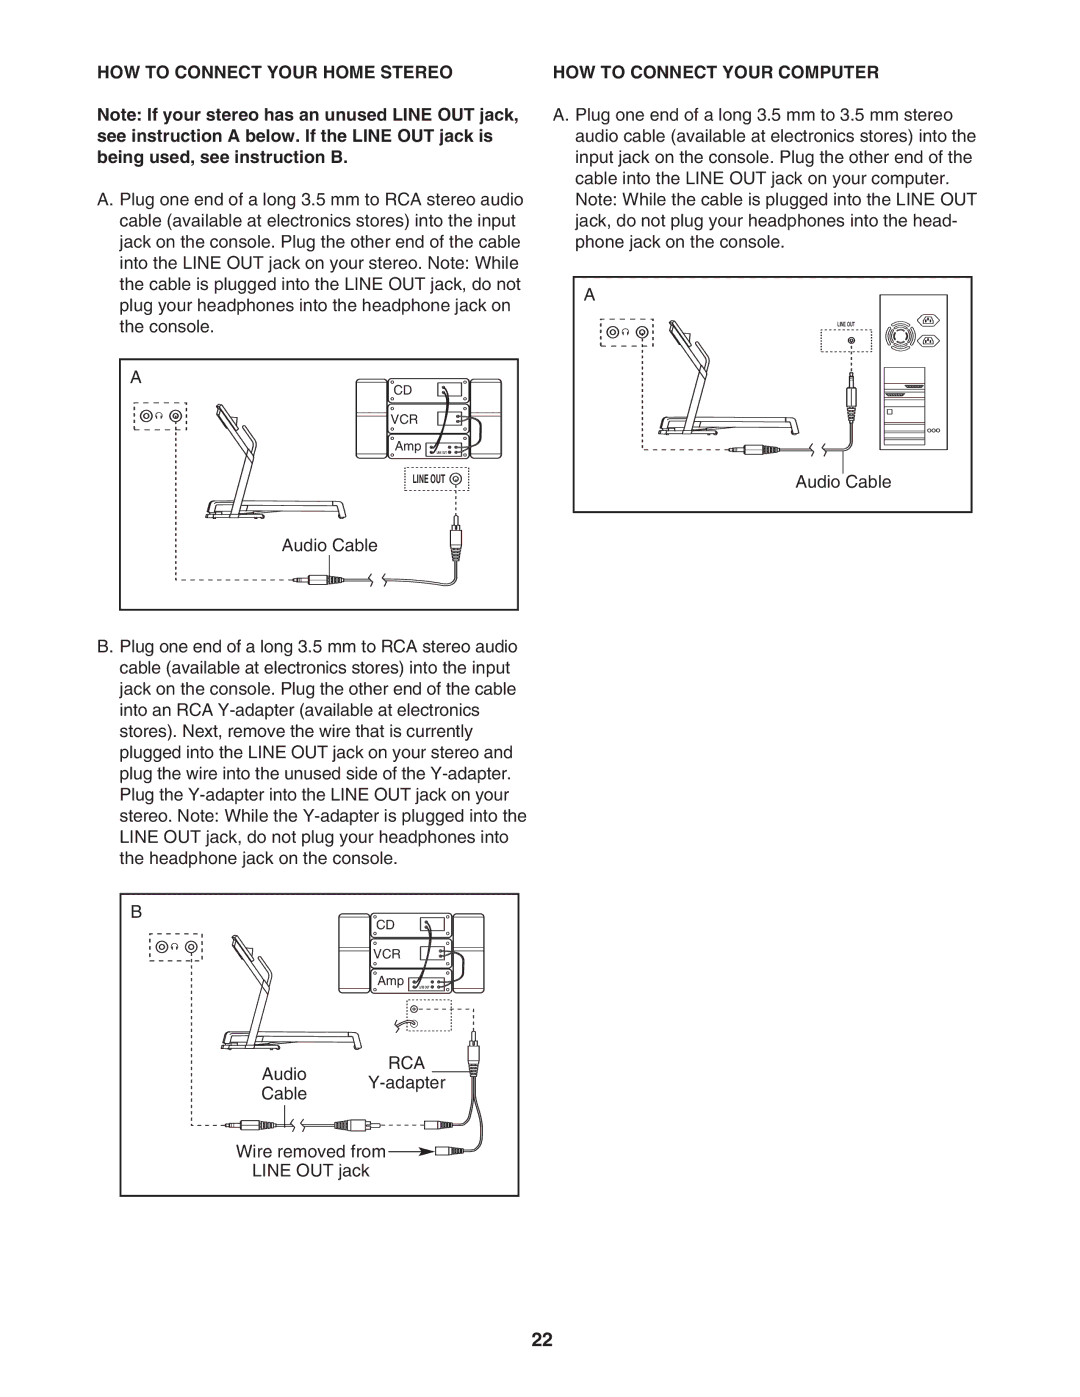 NordicTrack 30601.0 user manual HOW to Connect Your Home Stereo, HOW to Connect Your Computer 